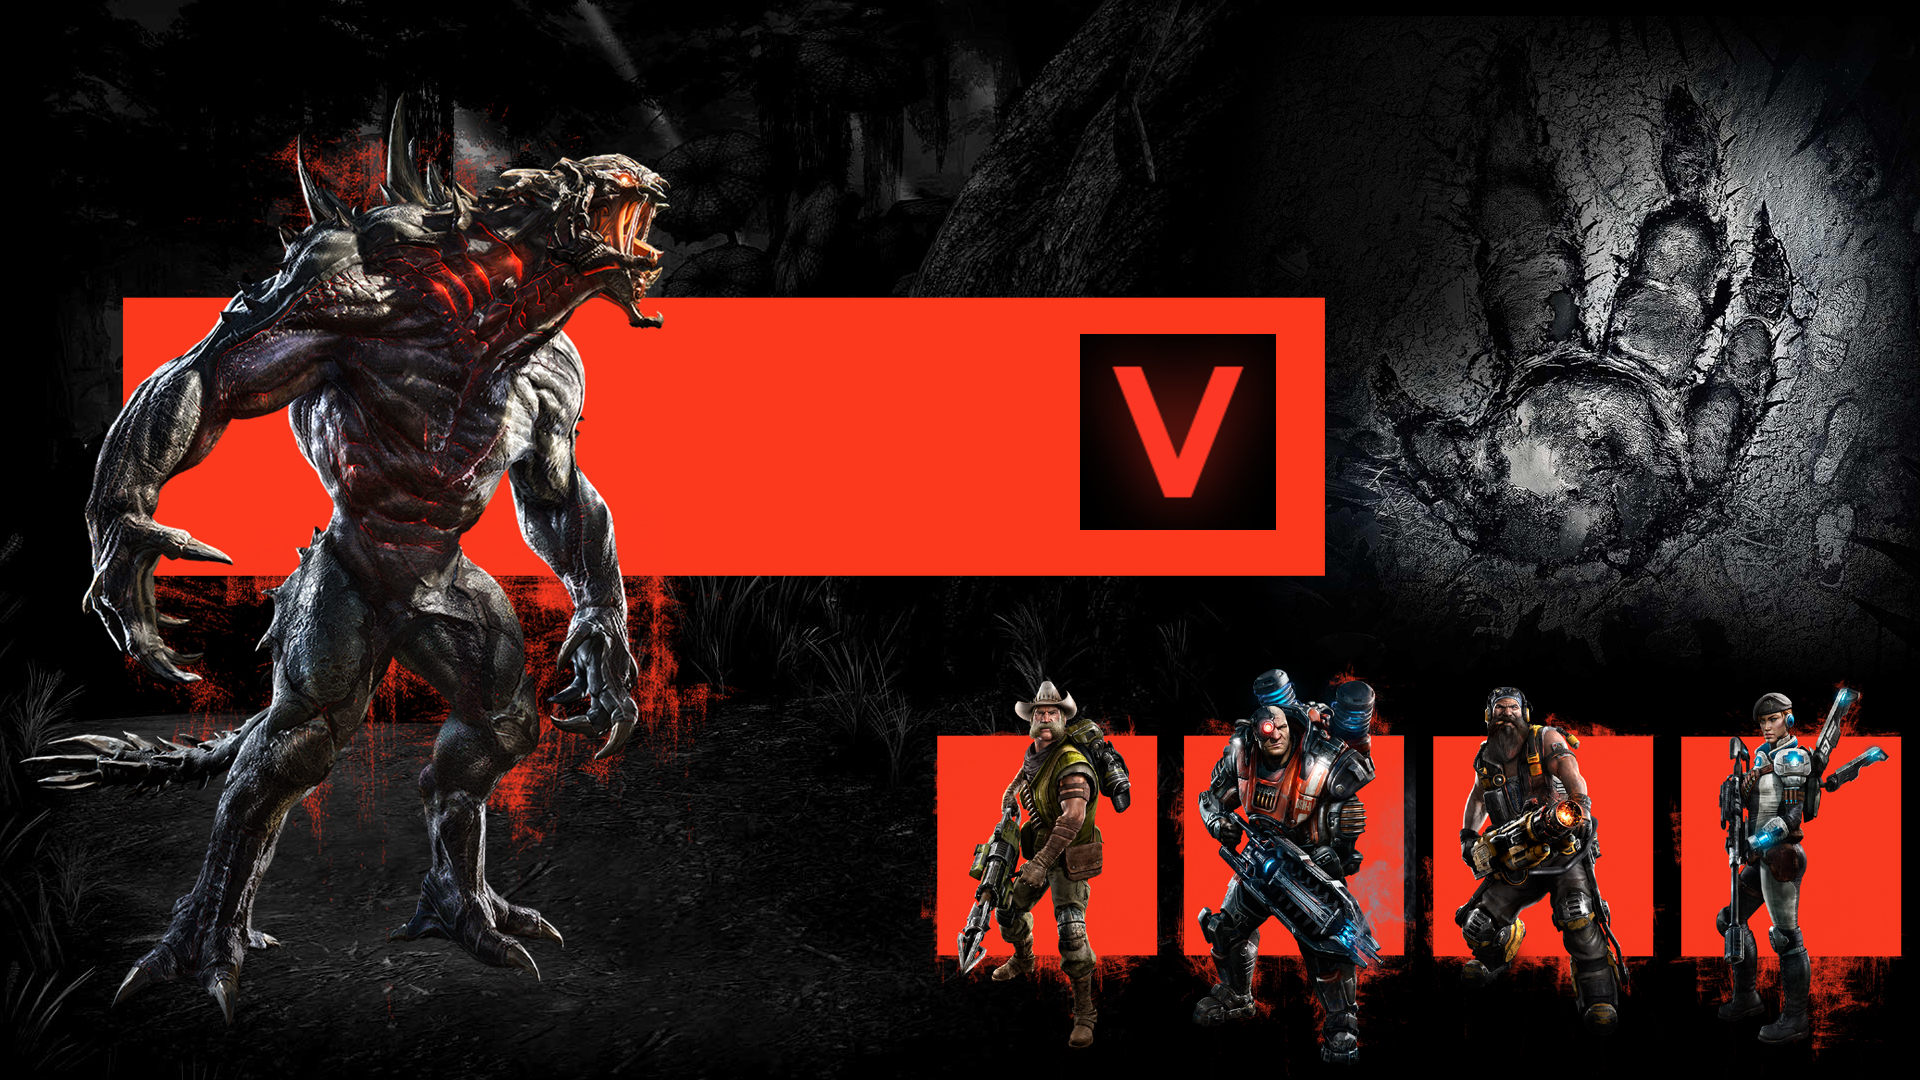 “Evolve” Big Alpha Roars onto PC and Consoles - Alpha Open for the Halloween Weekend